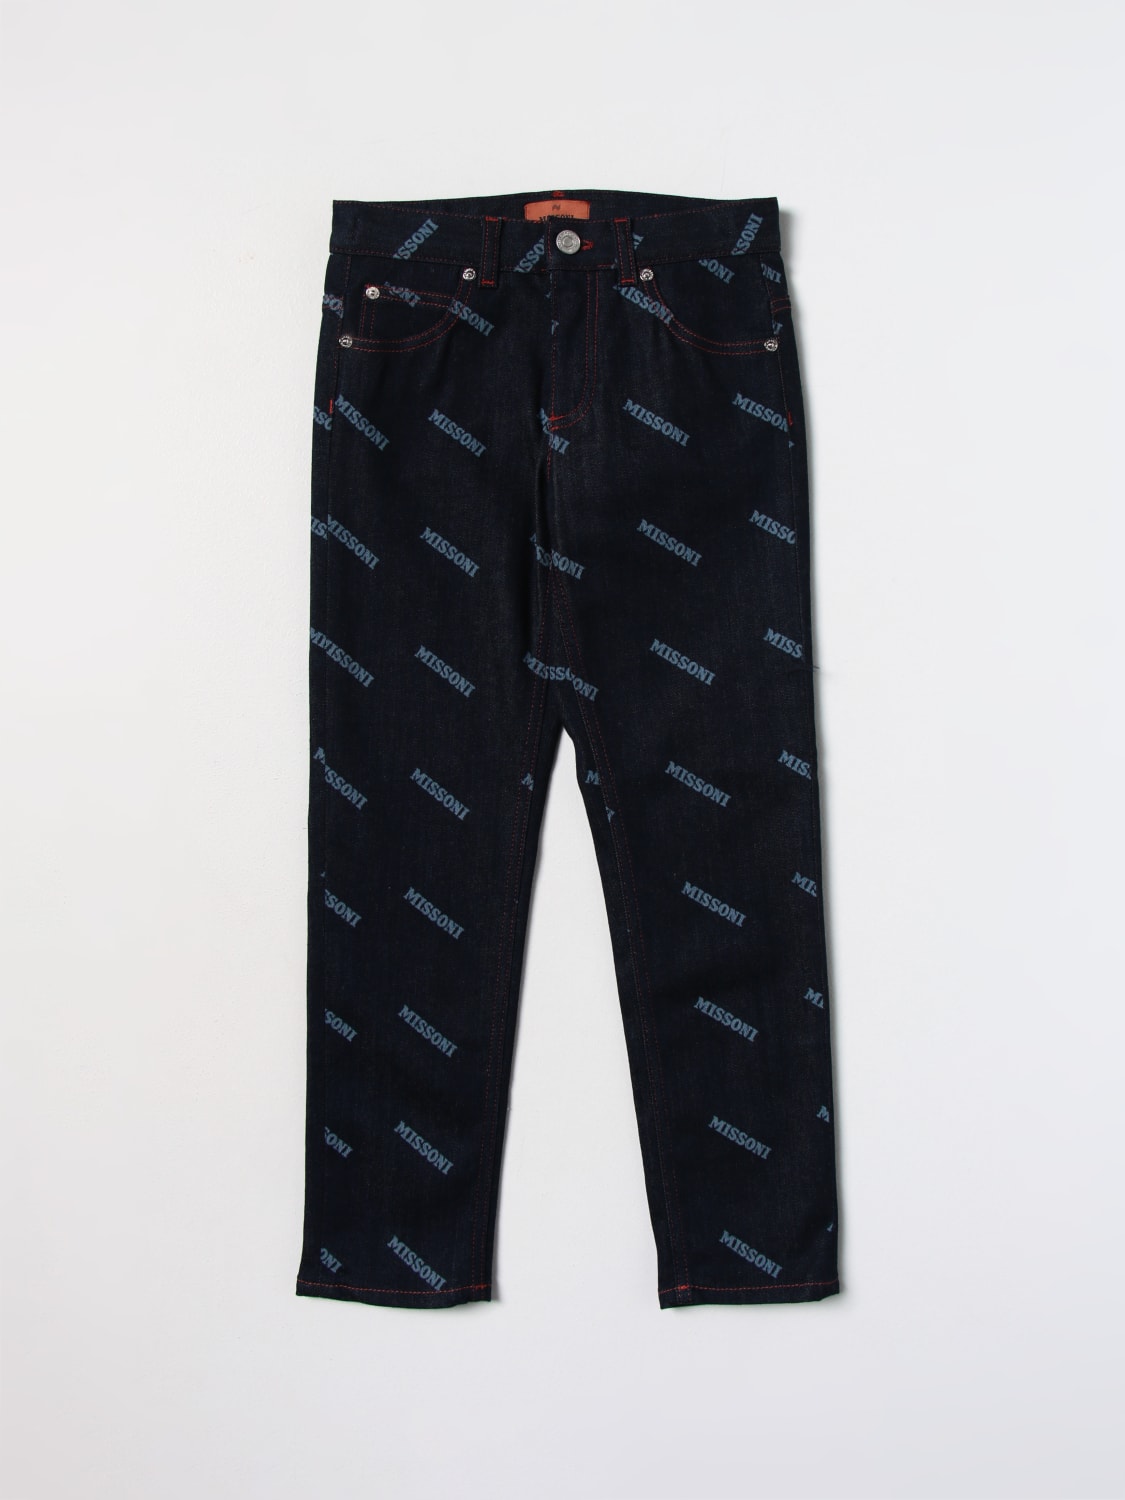 MISSONI: for boys - Blue | Missoni jeans MT6B20D0004 online on GIGLIO.COM